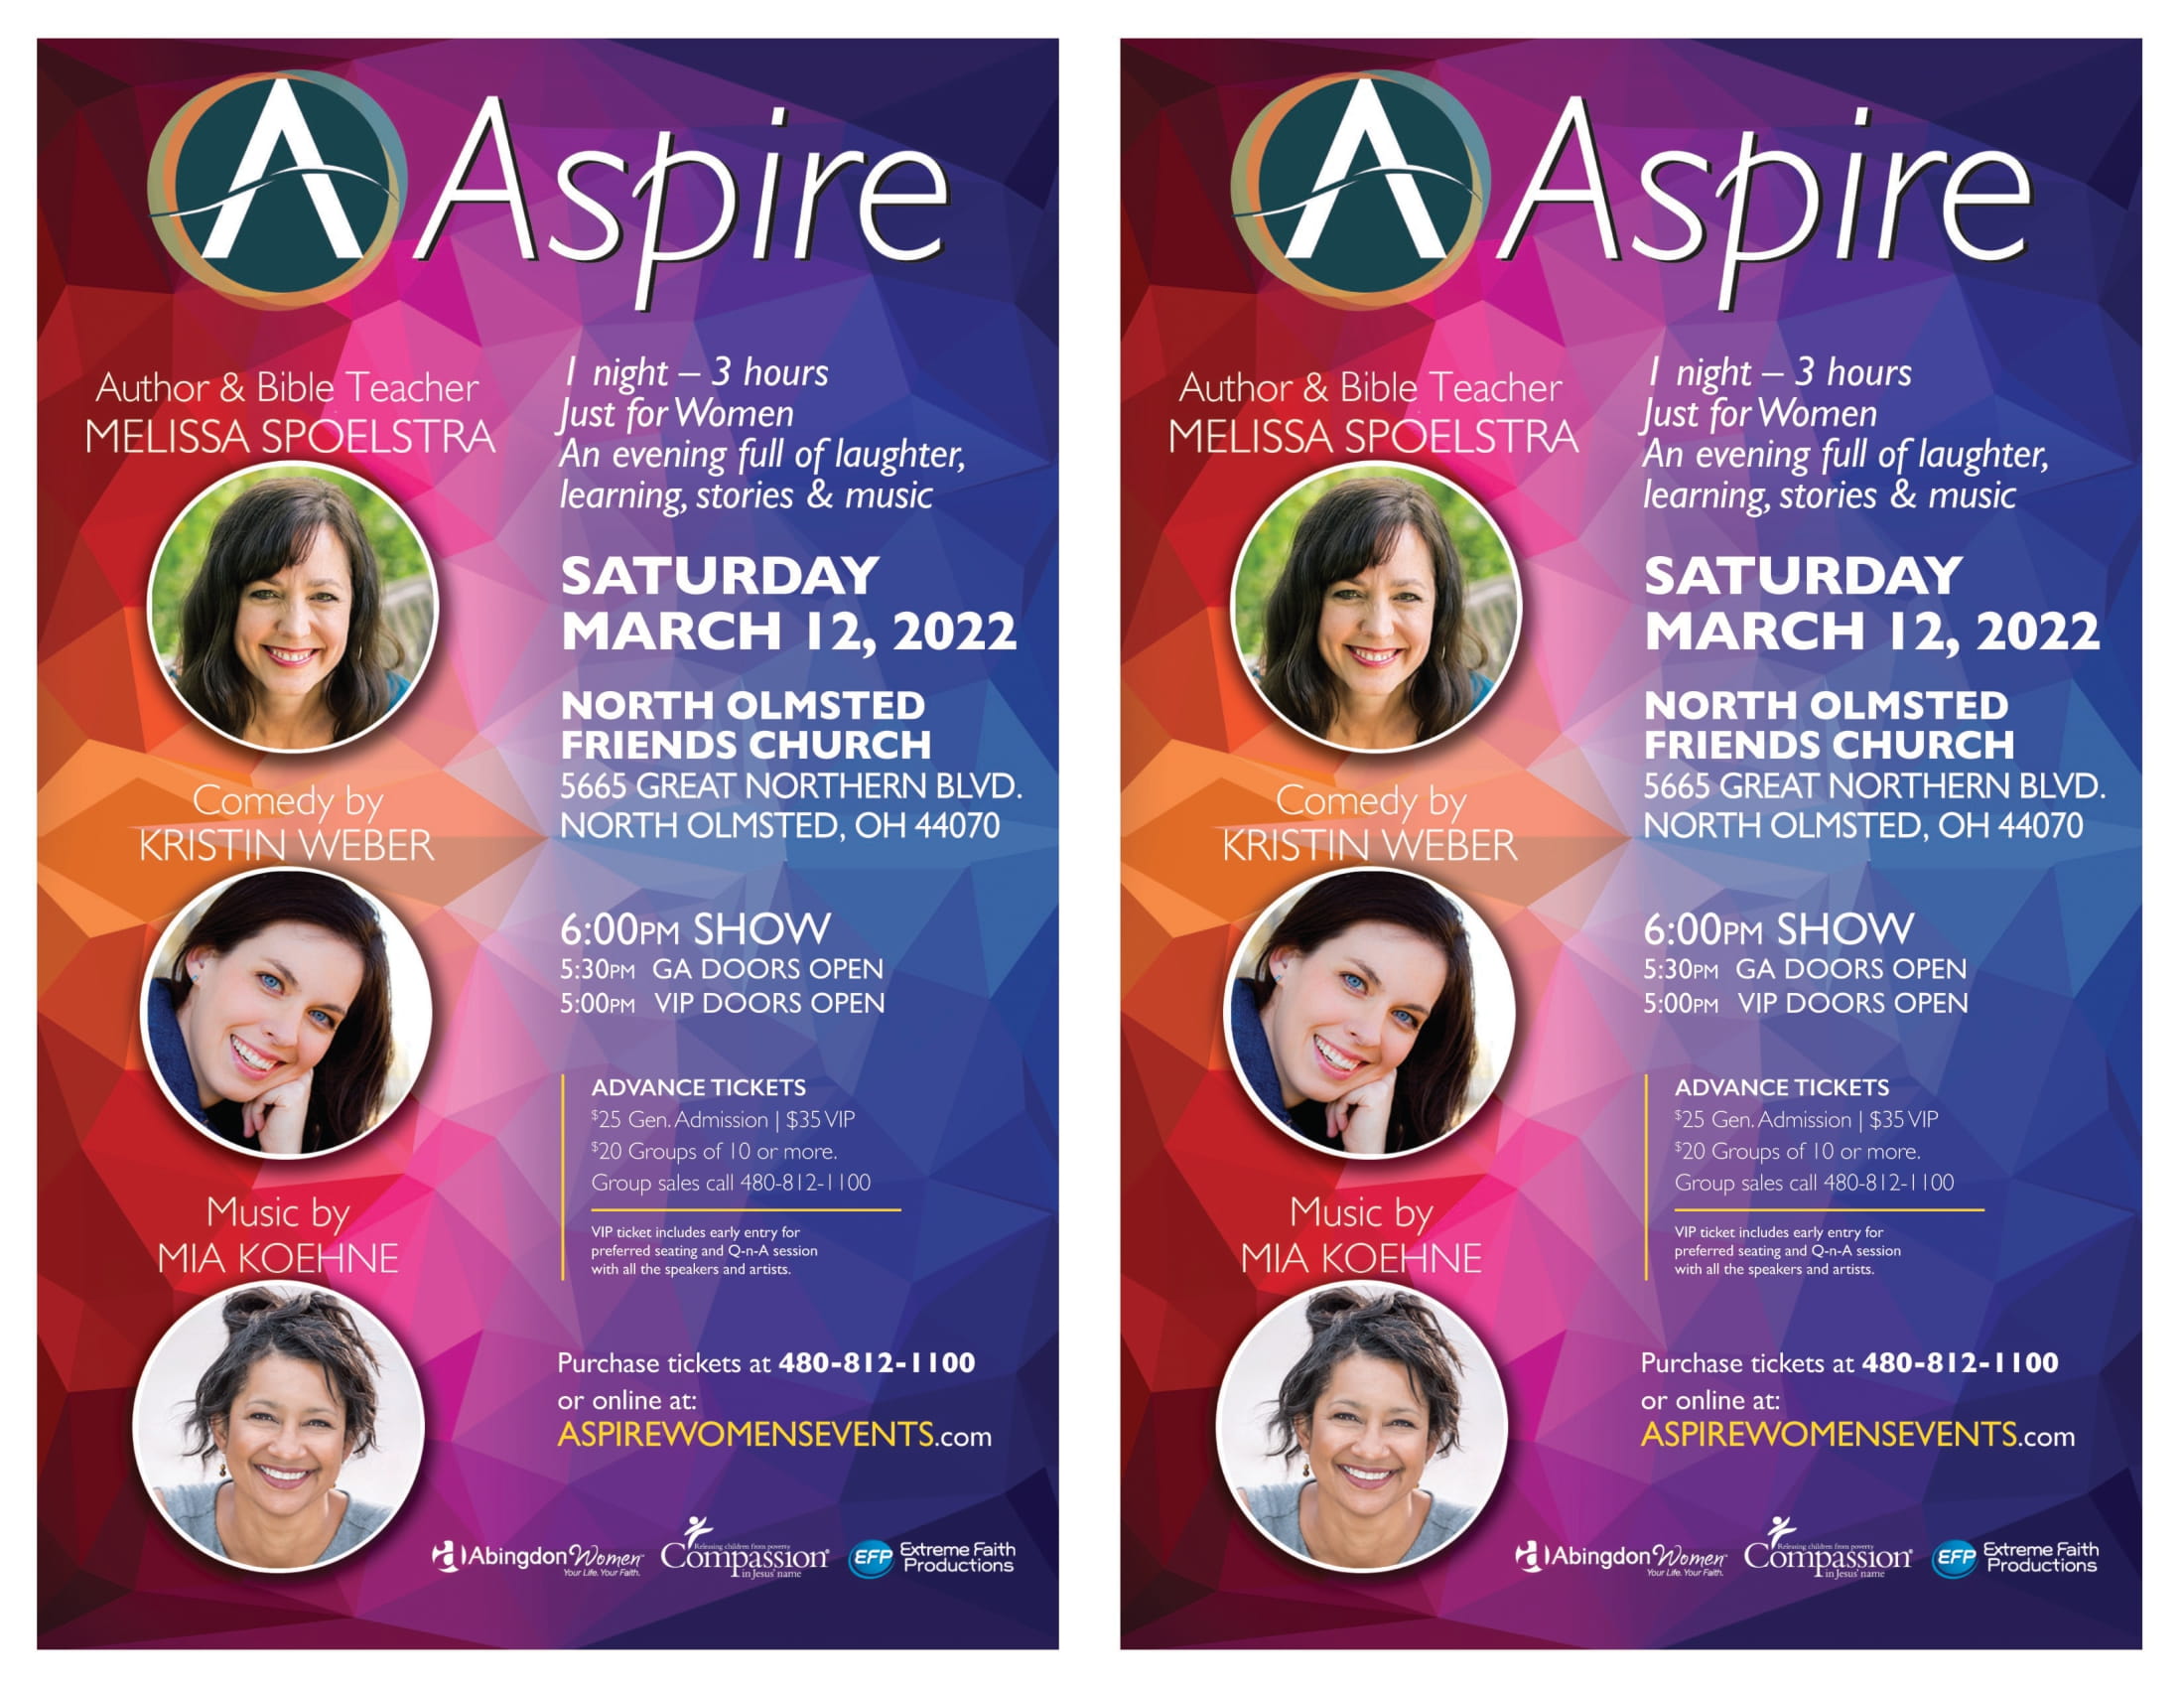 Aspire SAT March 12 North Olmsted-2UP-1